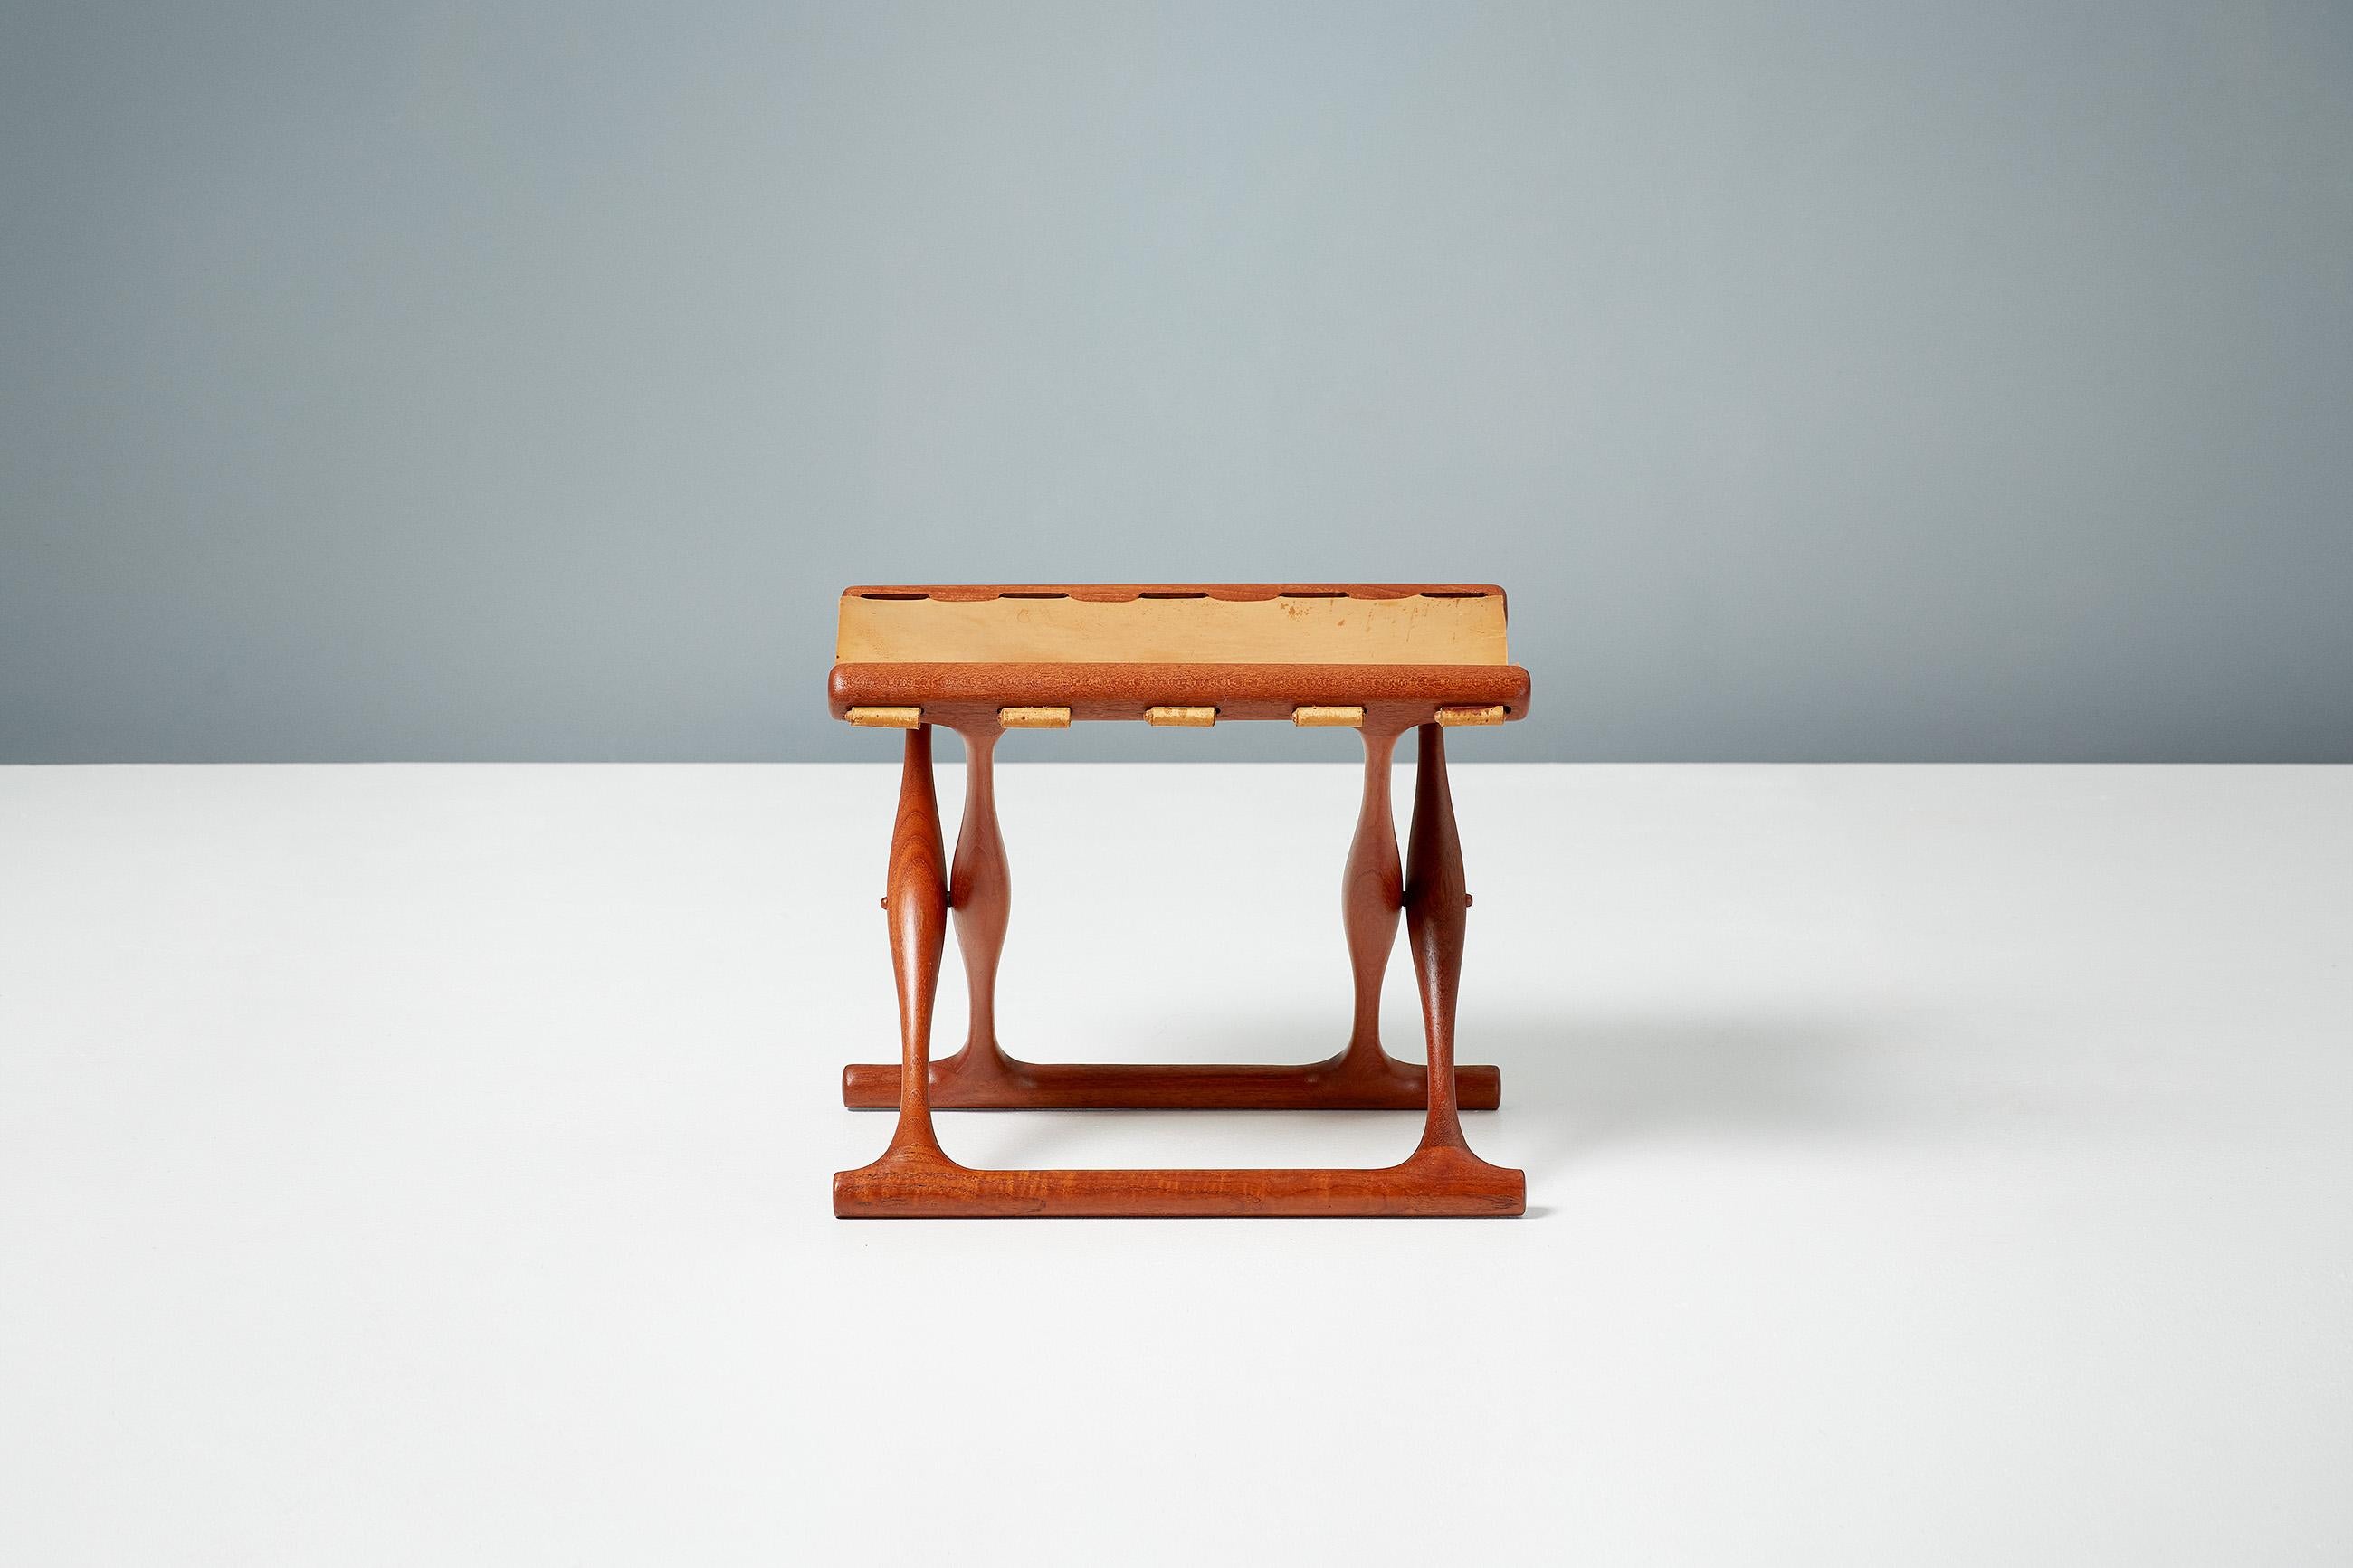 Poul Hundevad

Guldhoj folding stool, 1948

The iconic model 41 folding stool in beautifully aged teak wood with original, patinated cognac brown saddle leather seat. The Guldhoj stool was designed as a replica of a Bronze Age artefact found in